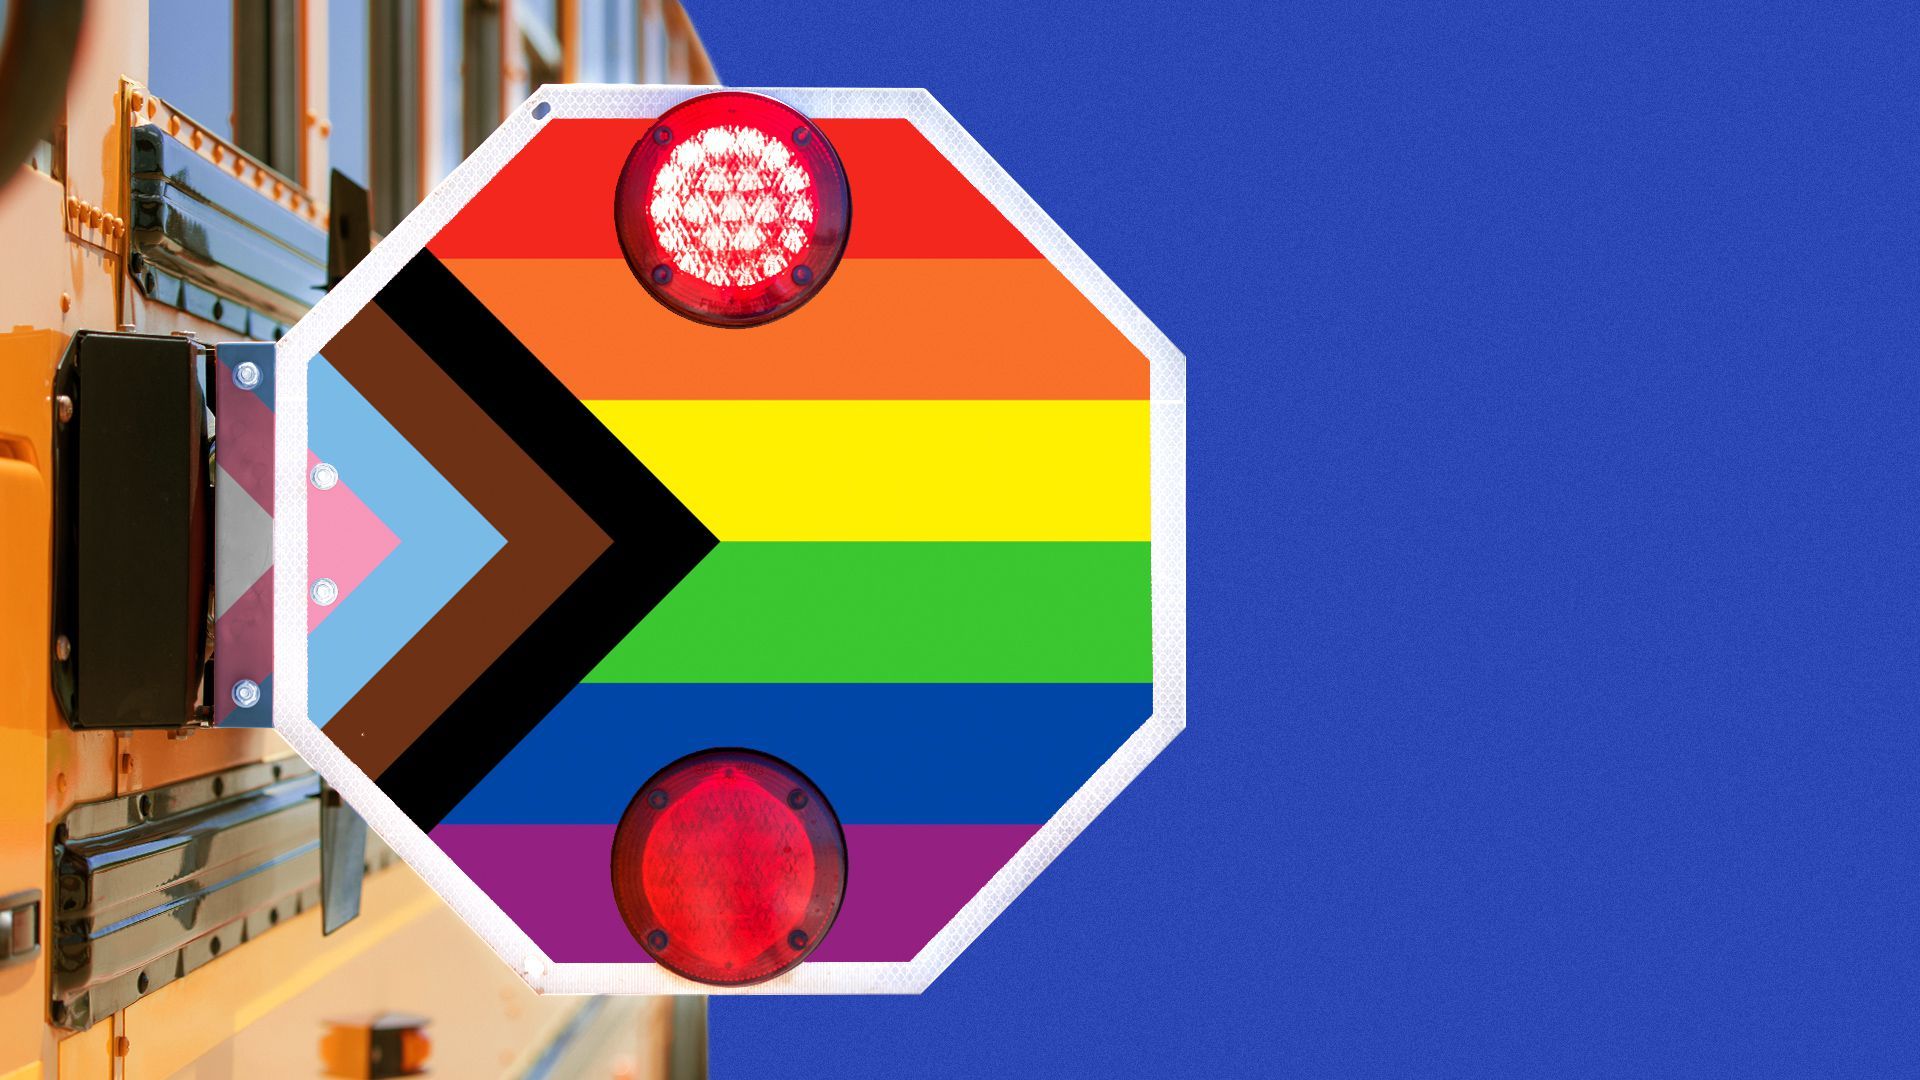 Illustration of a school bus with an activated stop sign showing a pride flag.